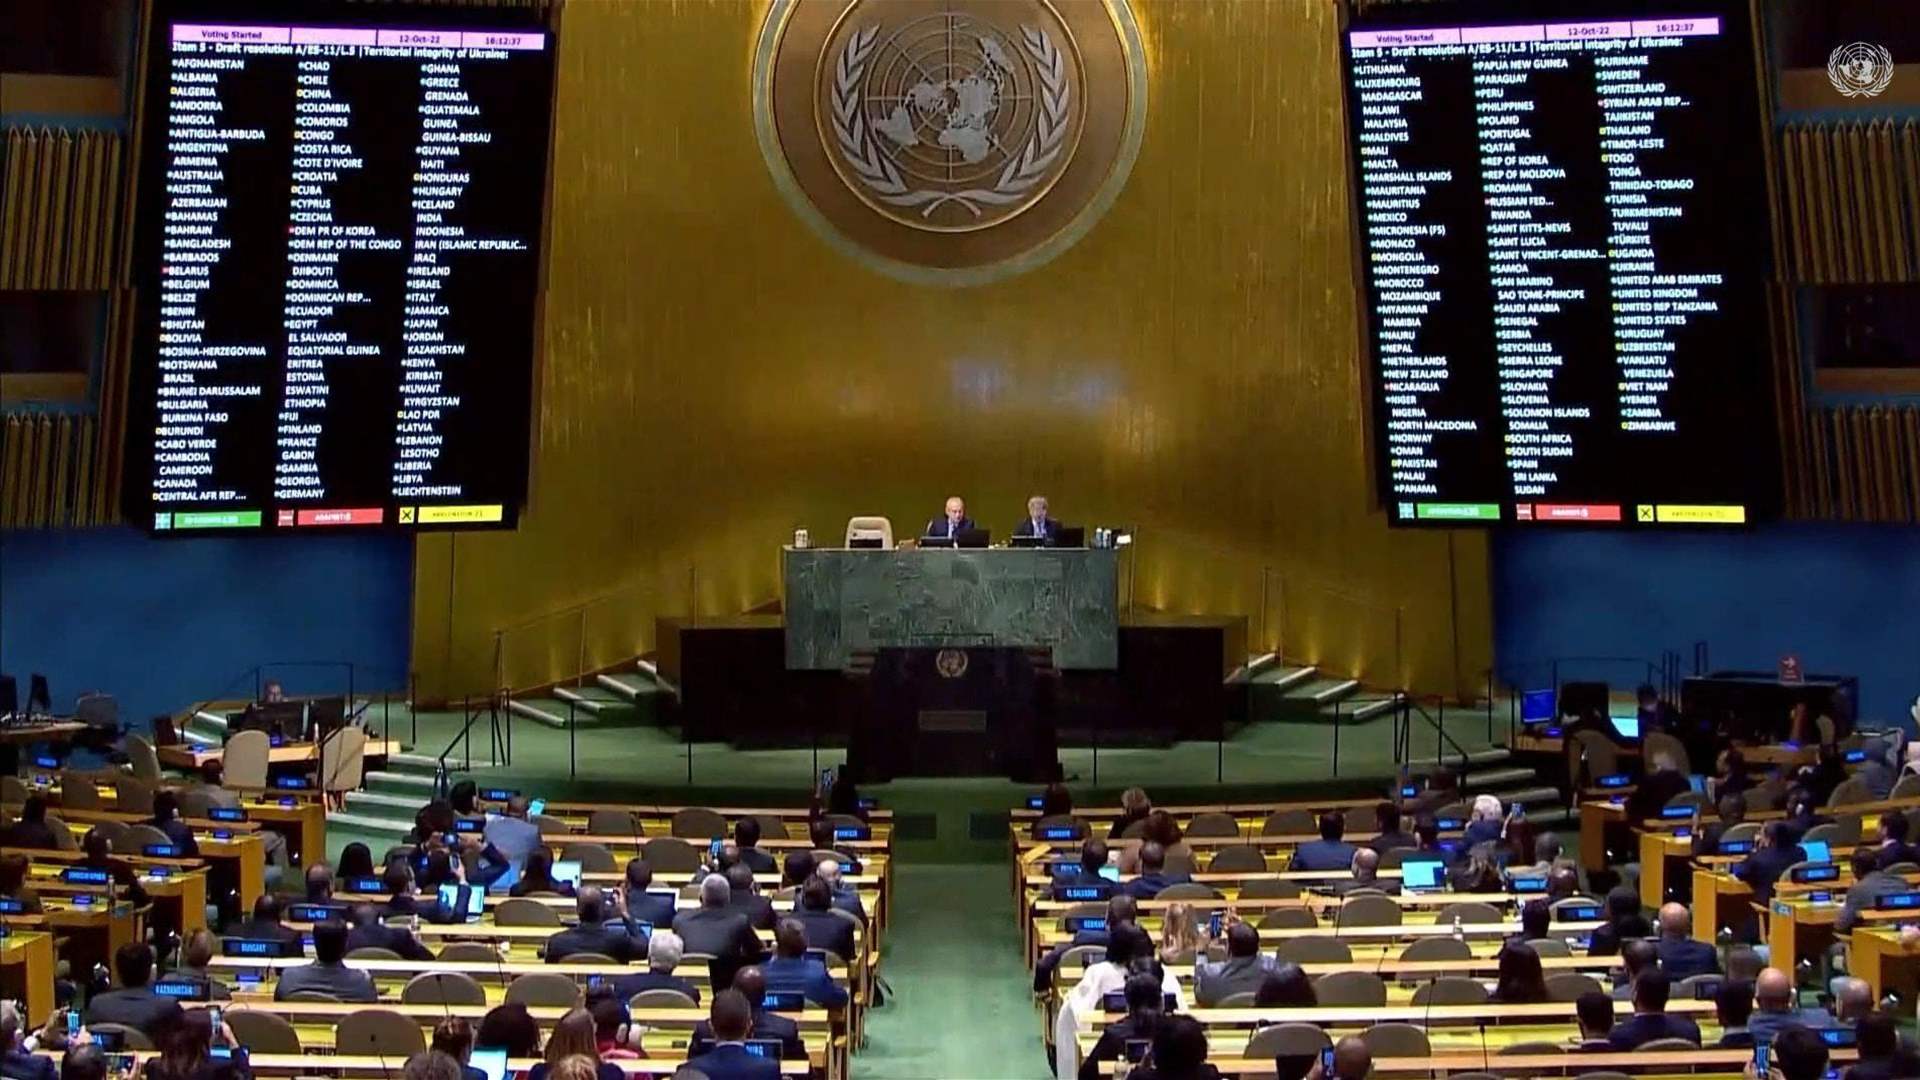 Lebanon to pay $1.8M to restore UN voting right